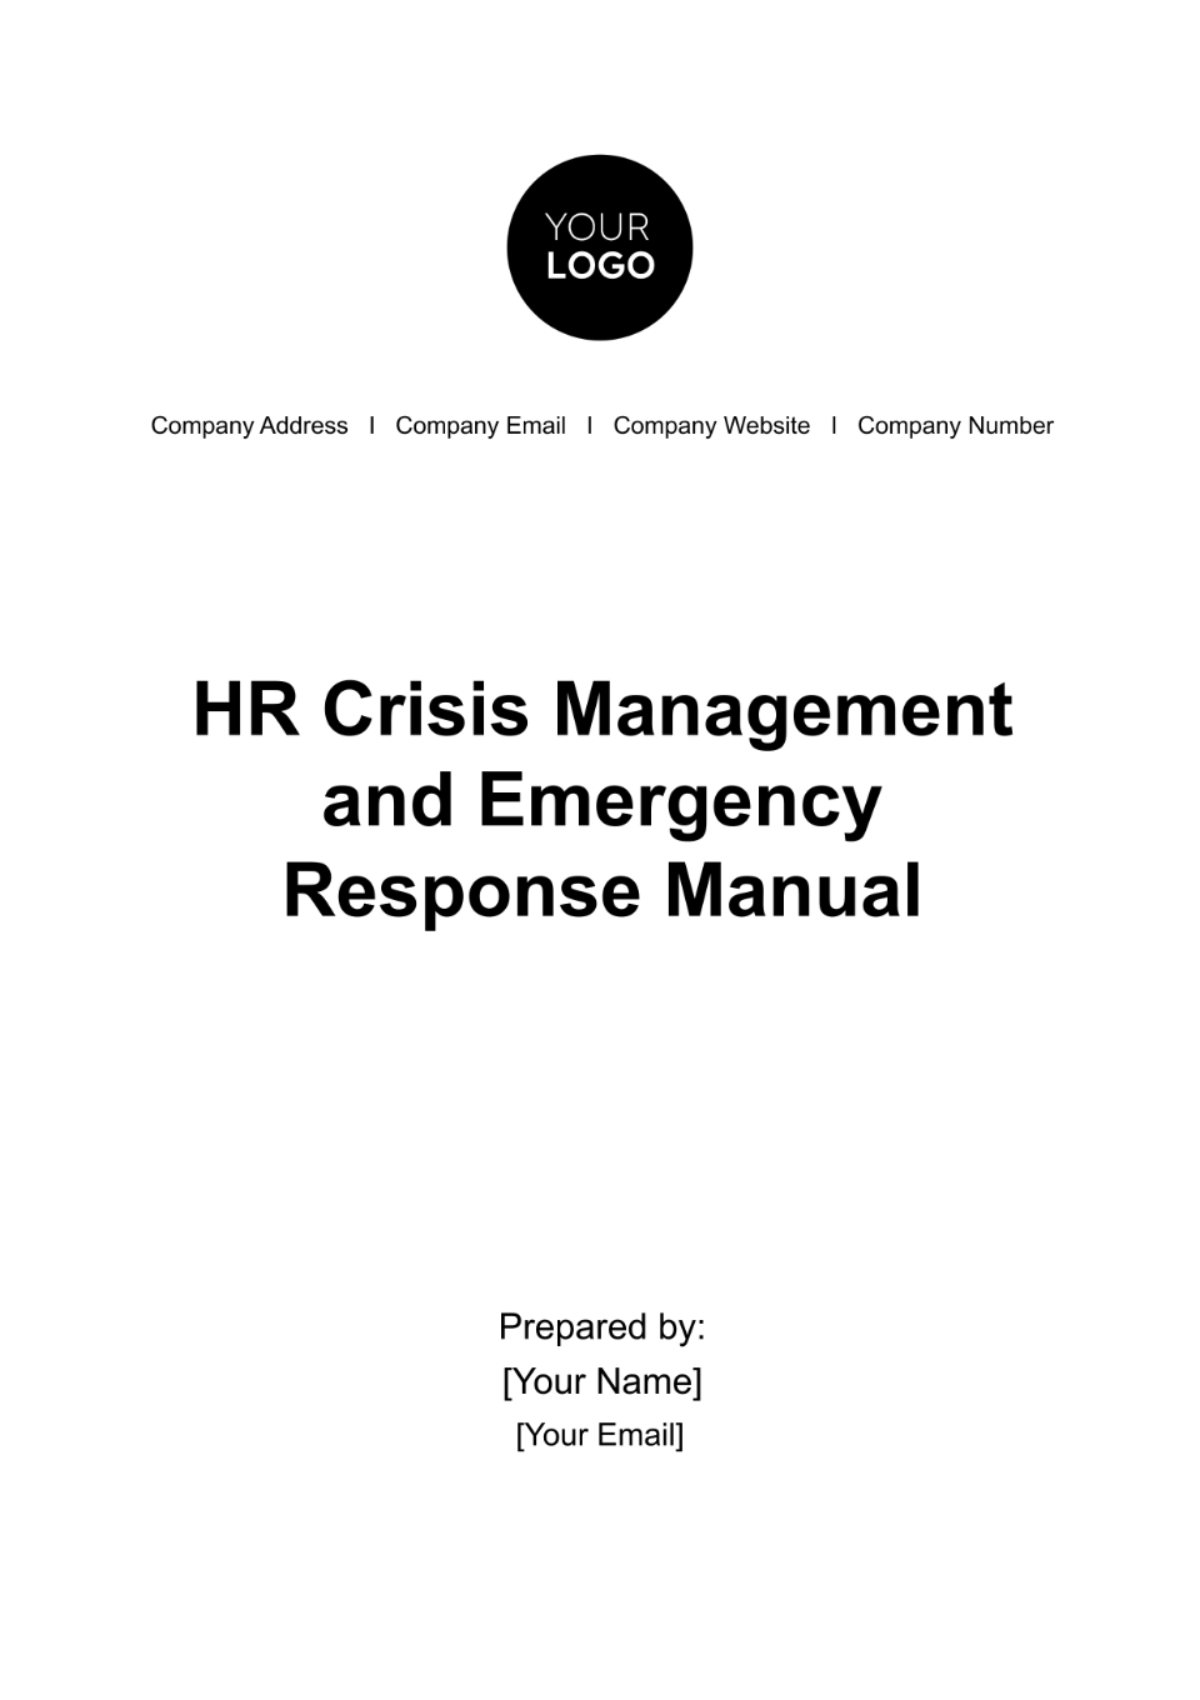 HR Crisis Management and Emergency Response Manual Template